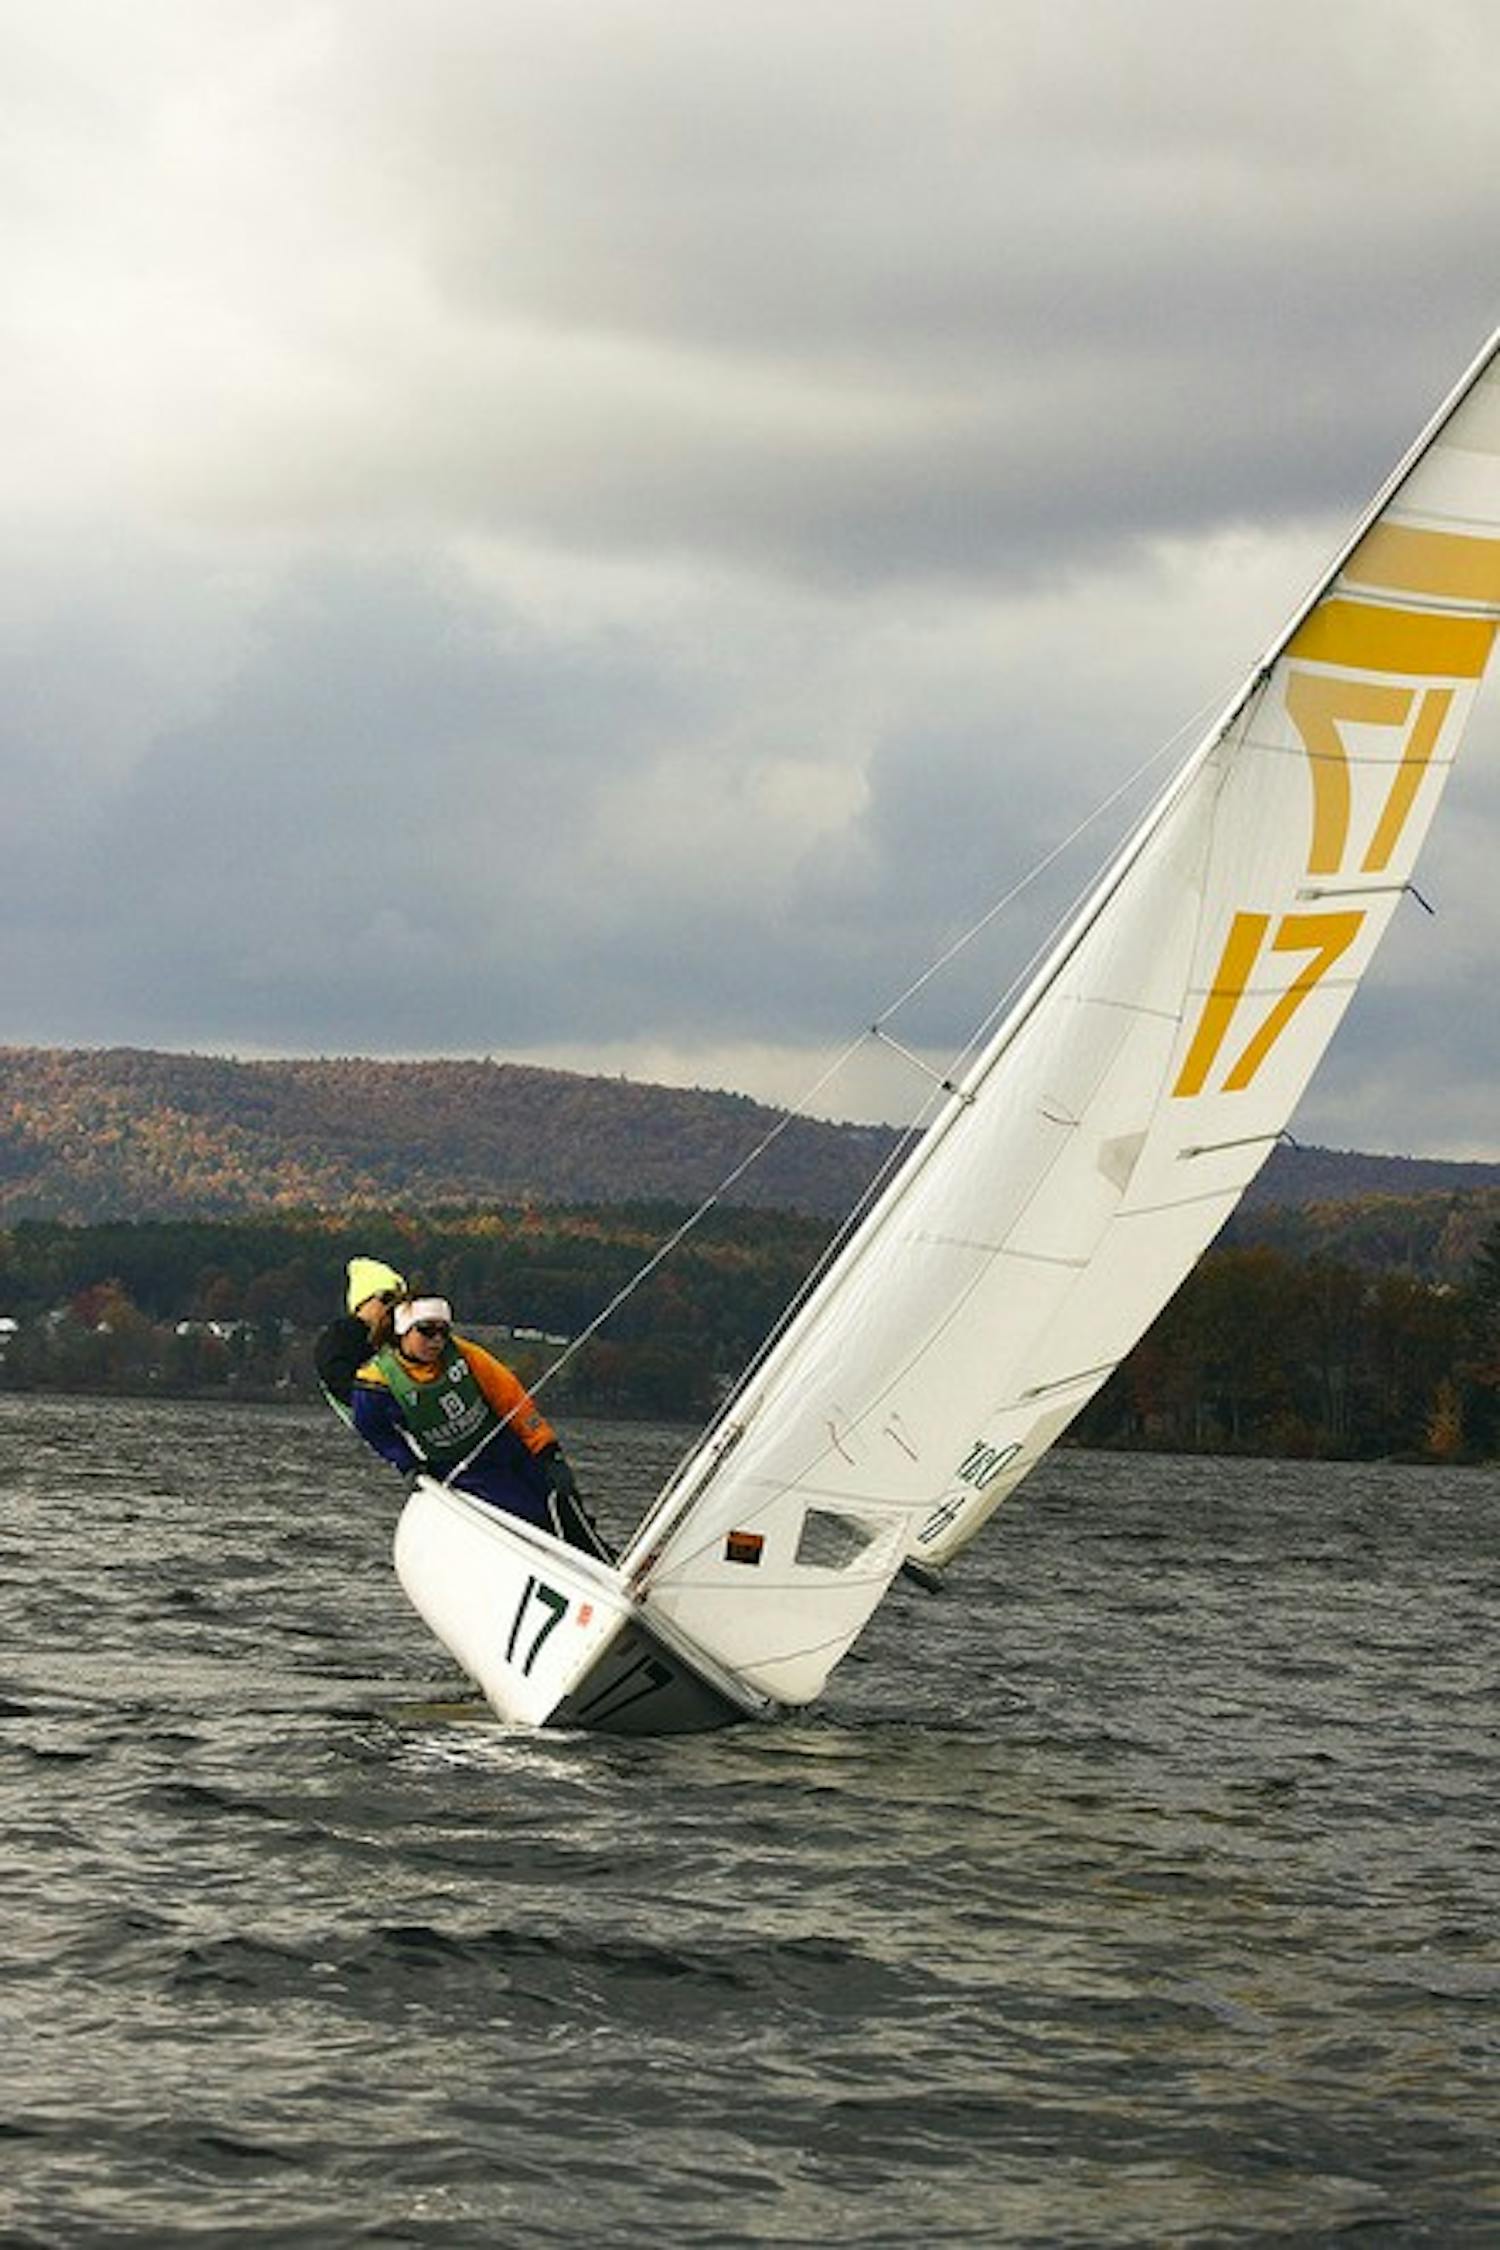 The sailing team competed in four regattas over the weekend, improving from their opening week.